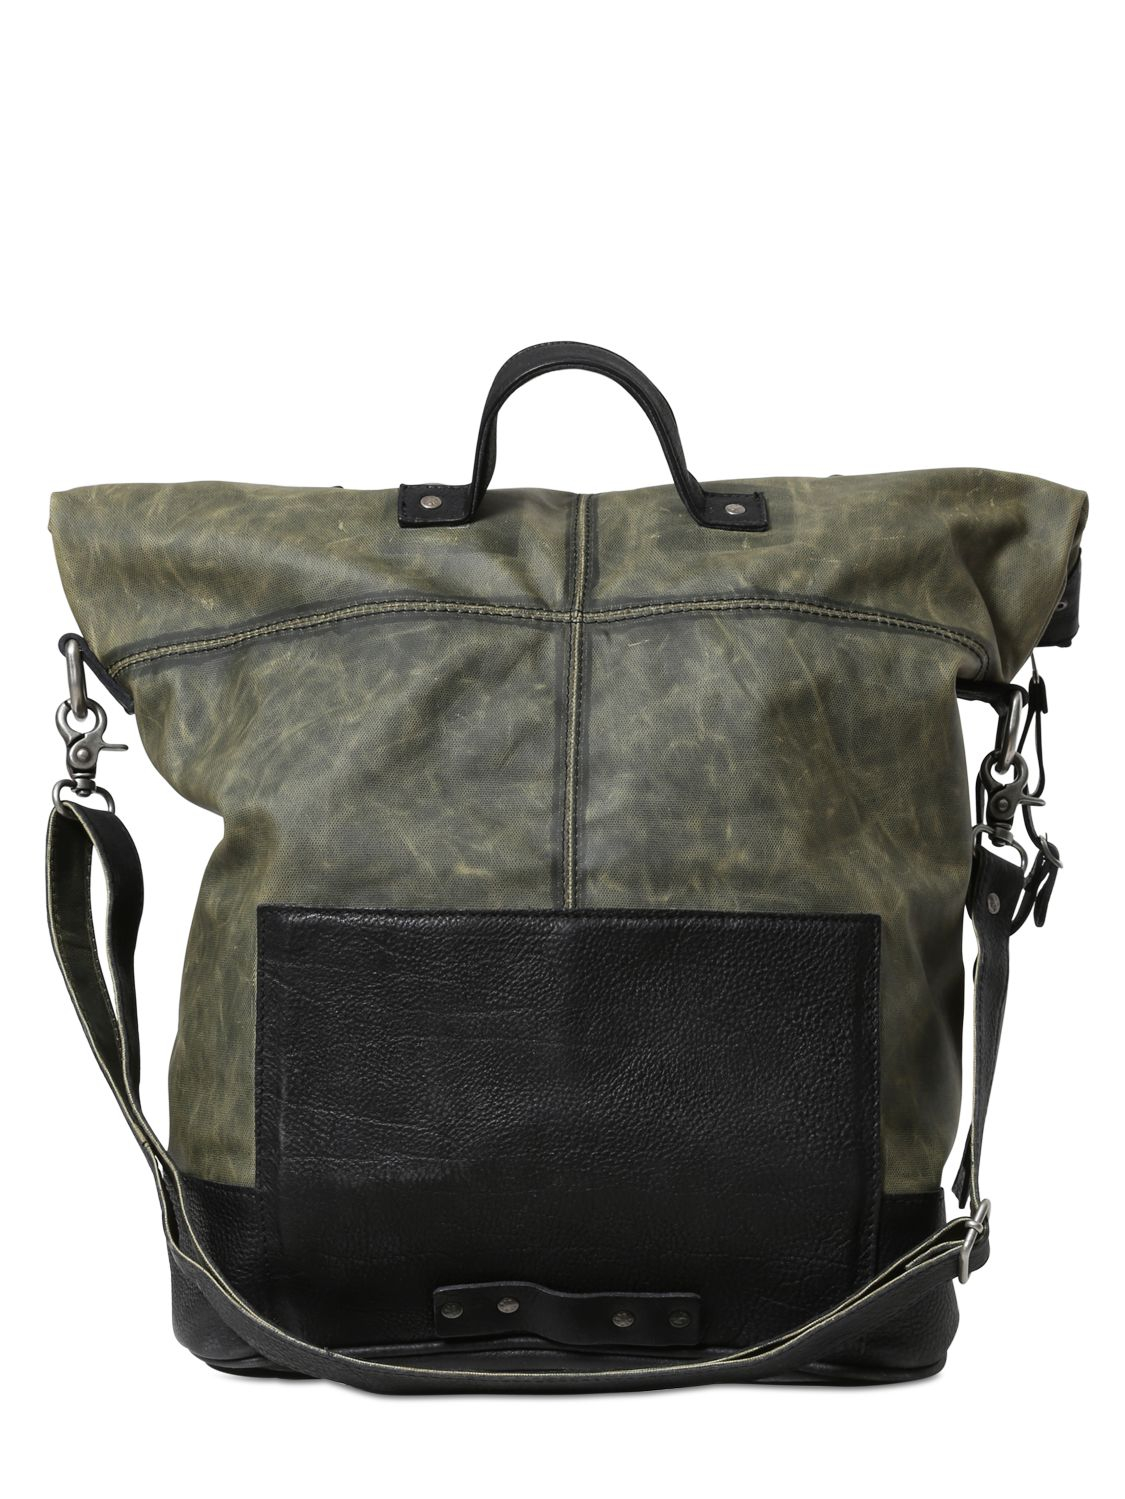 A.s.98 Waxed Canvas & Leather Backpack in Green for Men - Lyst